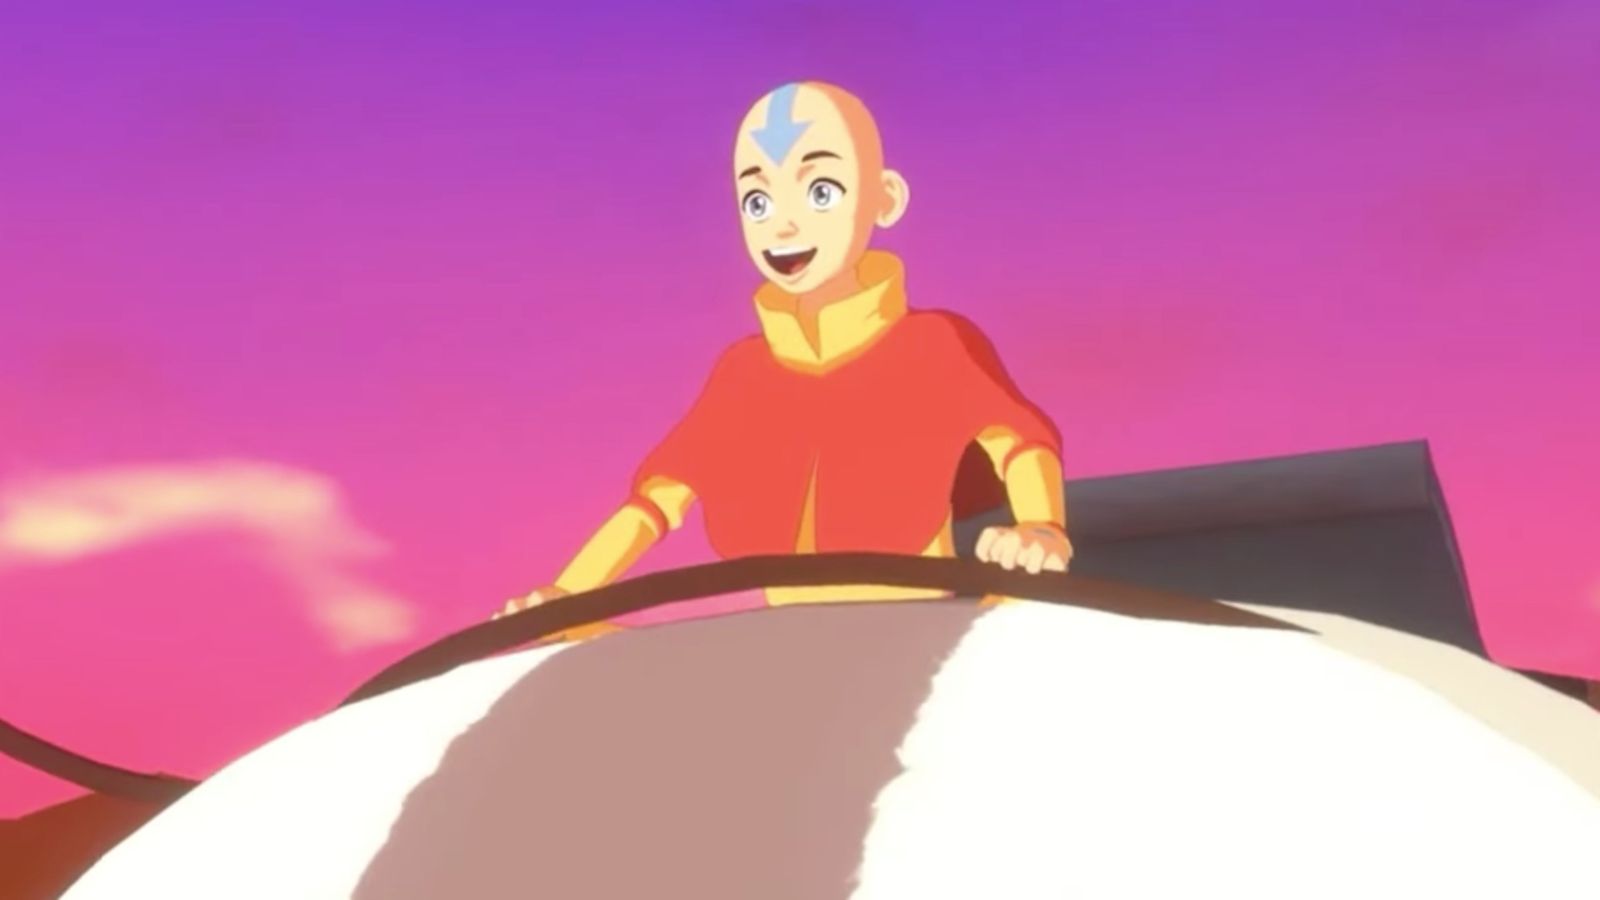 avatar the last airbender quest for balance retells the legendary story in video game form